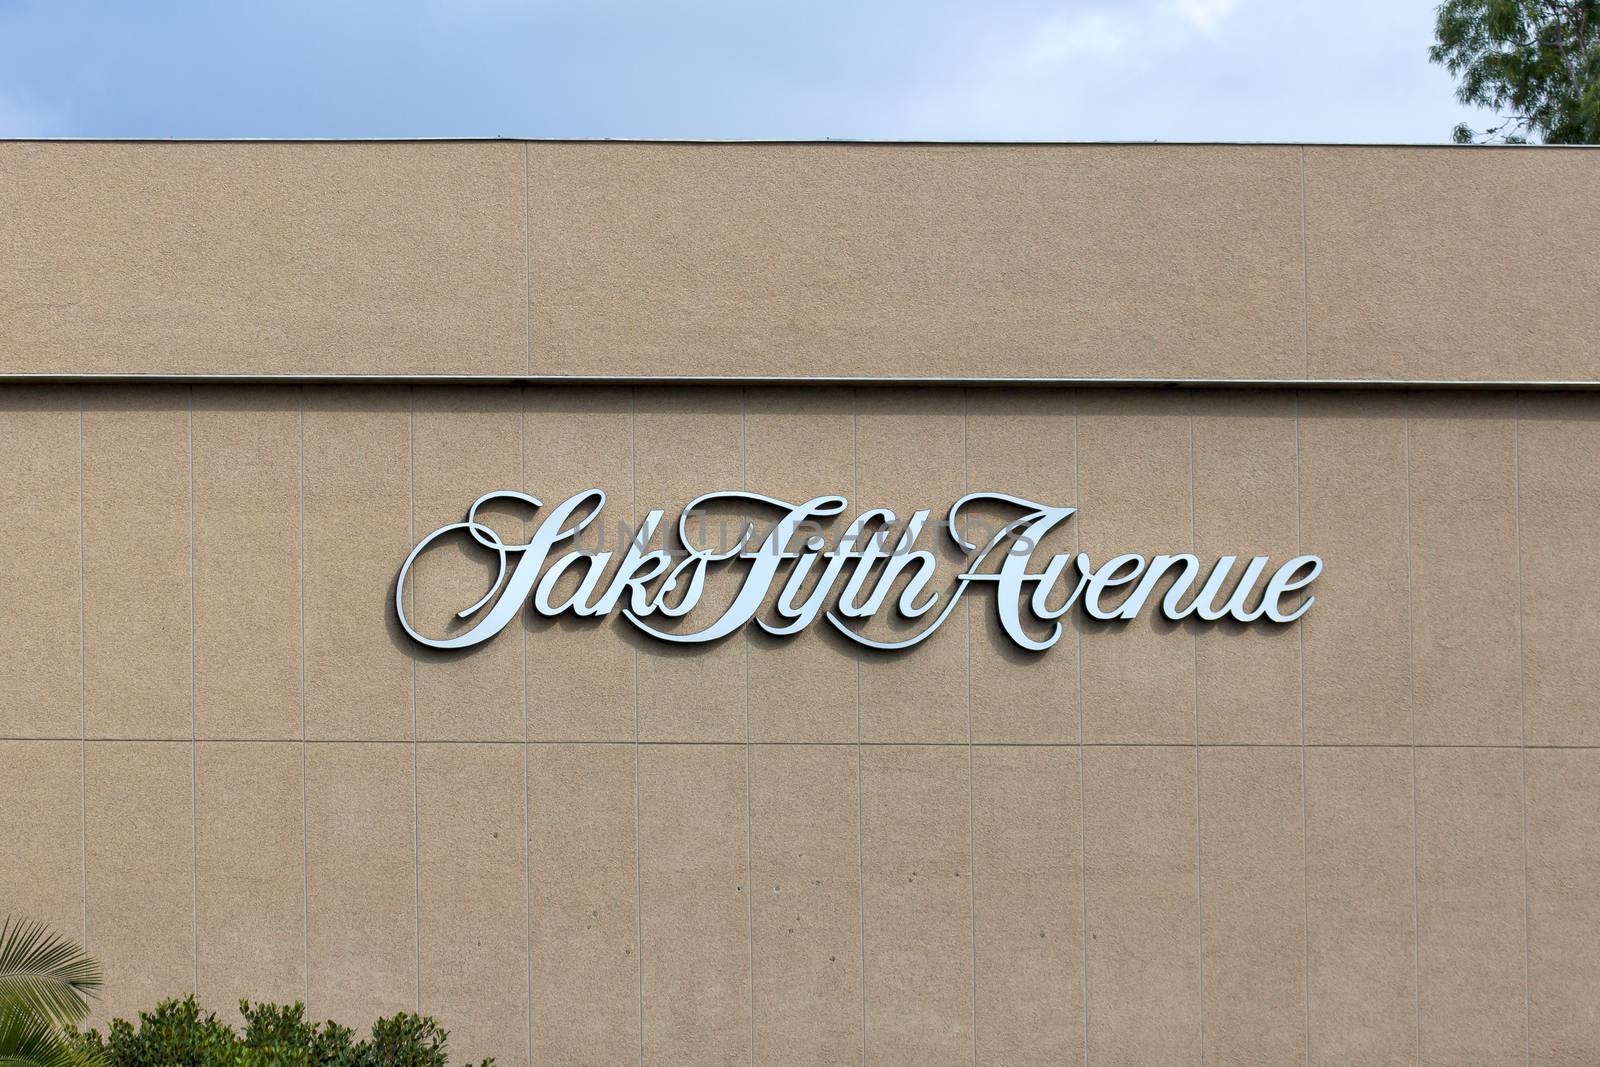 Saks Fifth Avenue Exterior by wolterk